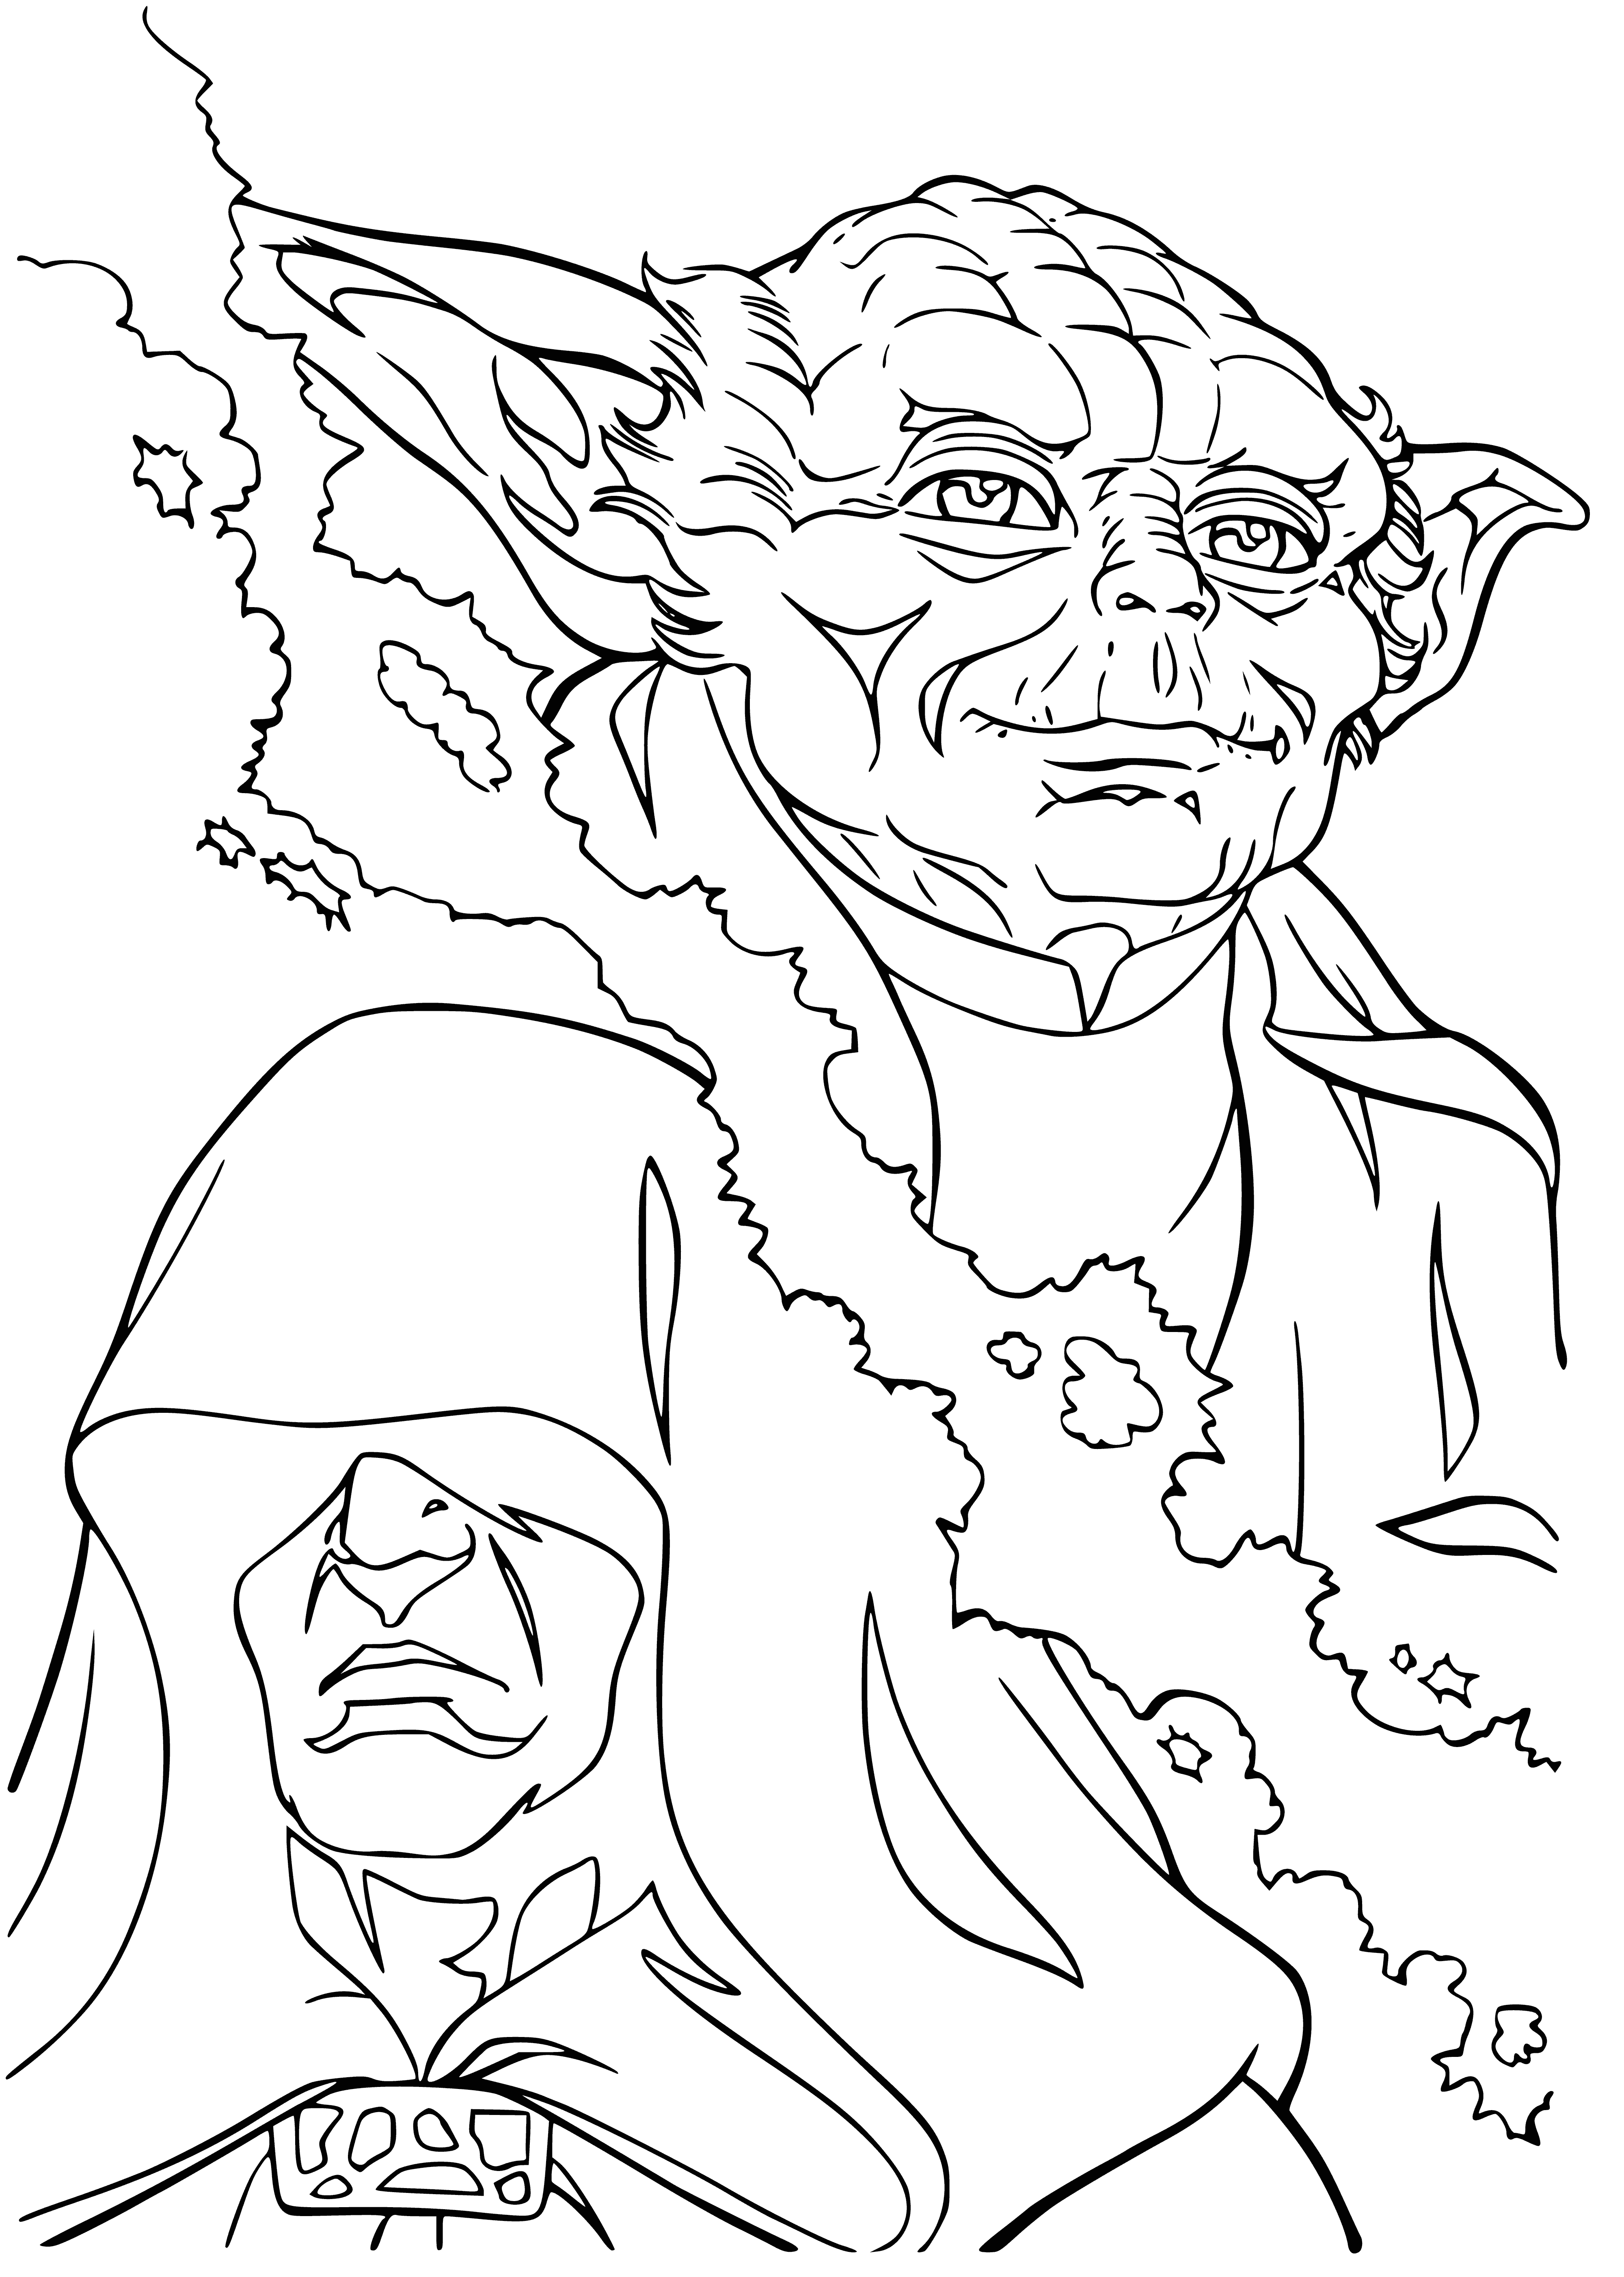 coloring page: Dark forces opposing Yoda, who holds a powerful green lightsaber. Will he prevail?